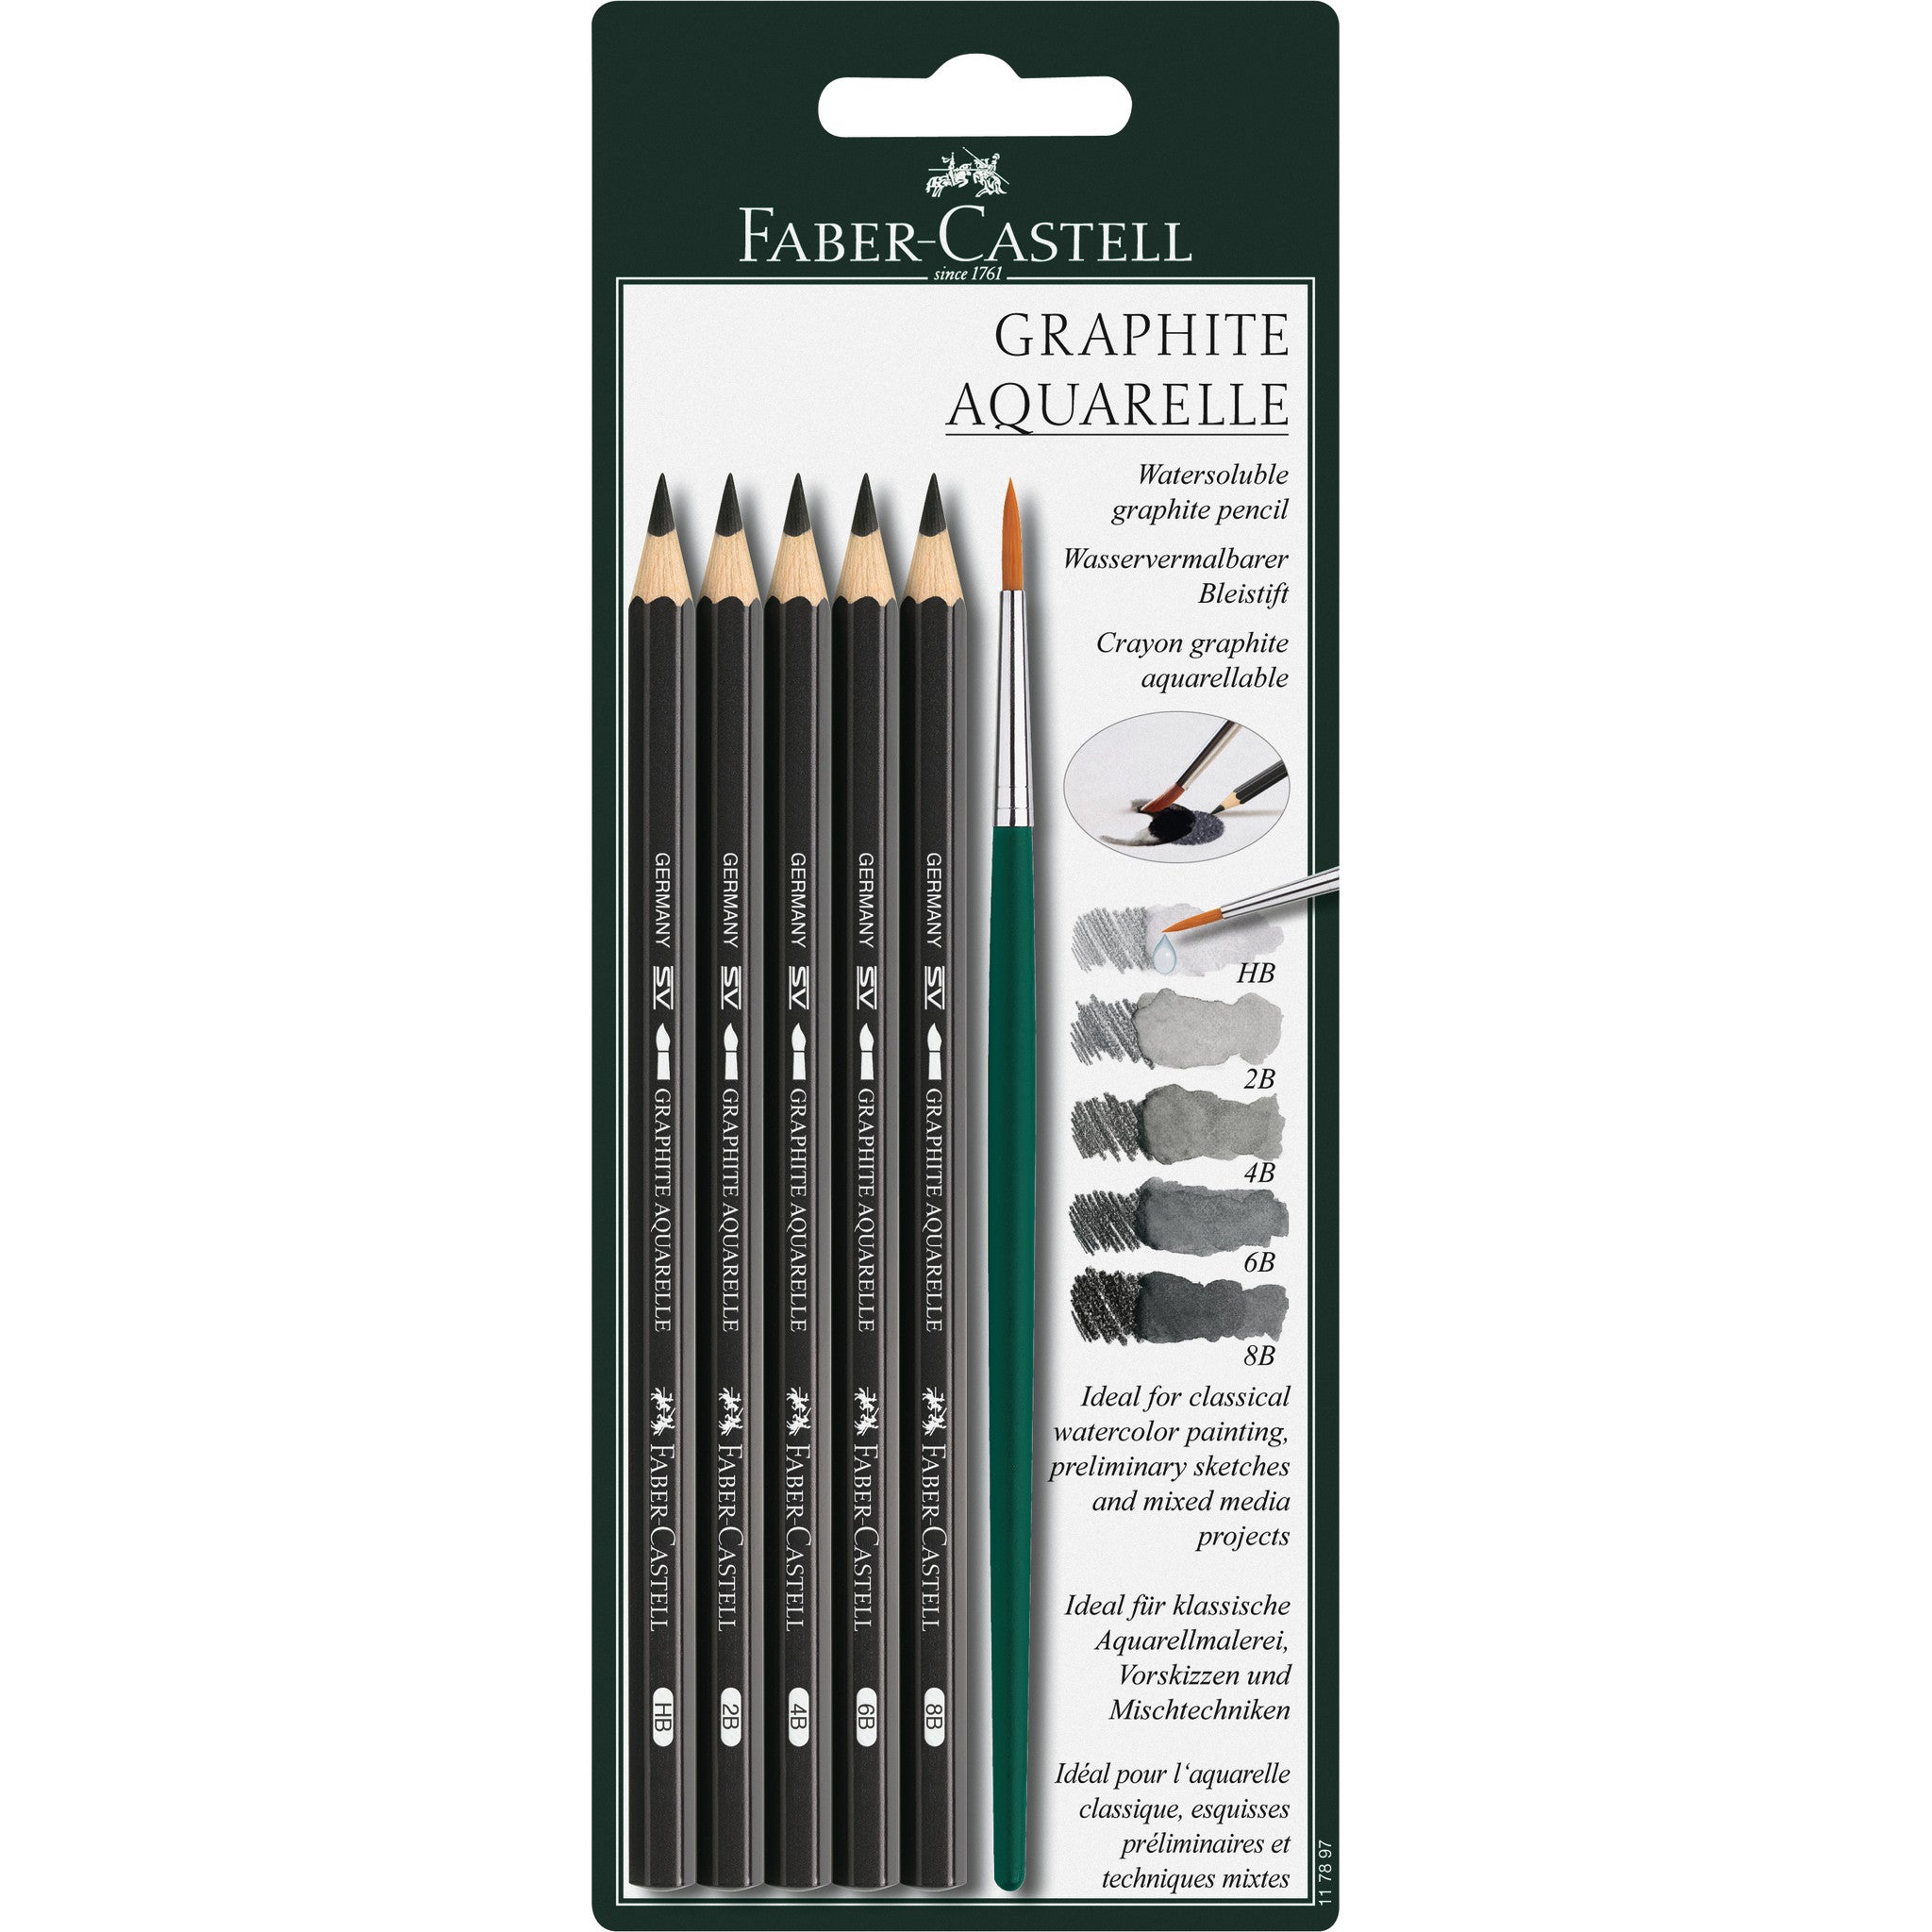 Faber-Castell 126 Piece Set - Art & Graphic Collection Mahogany Gift Box